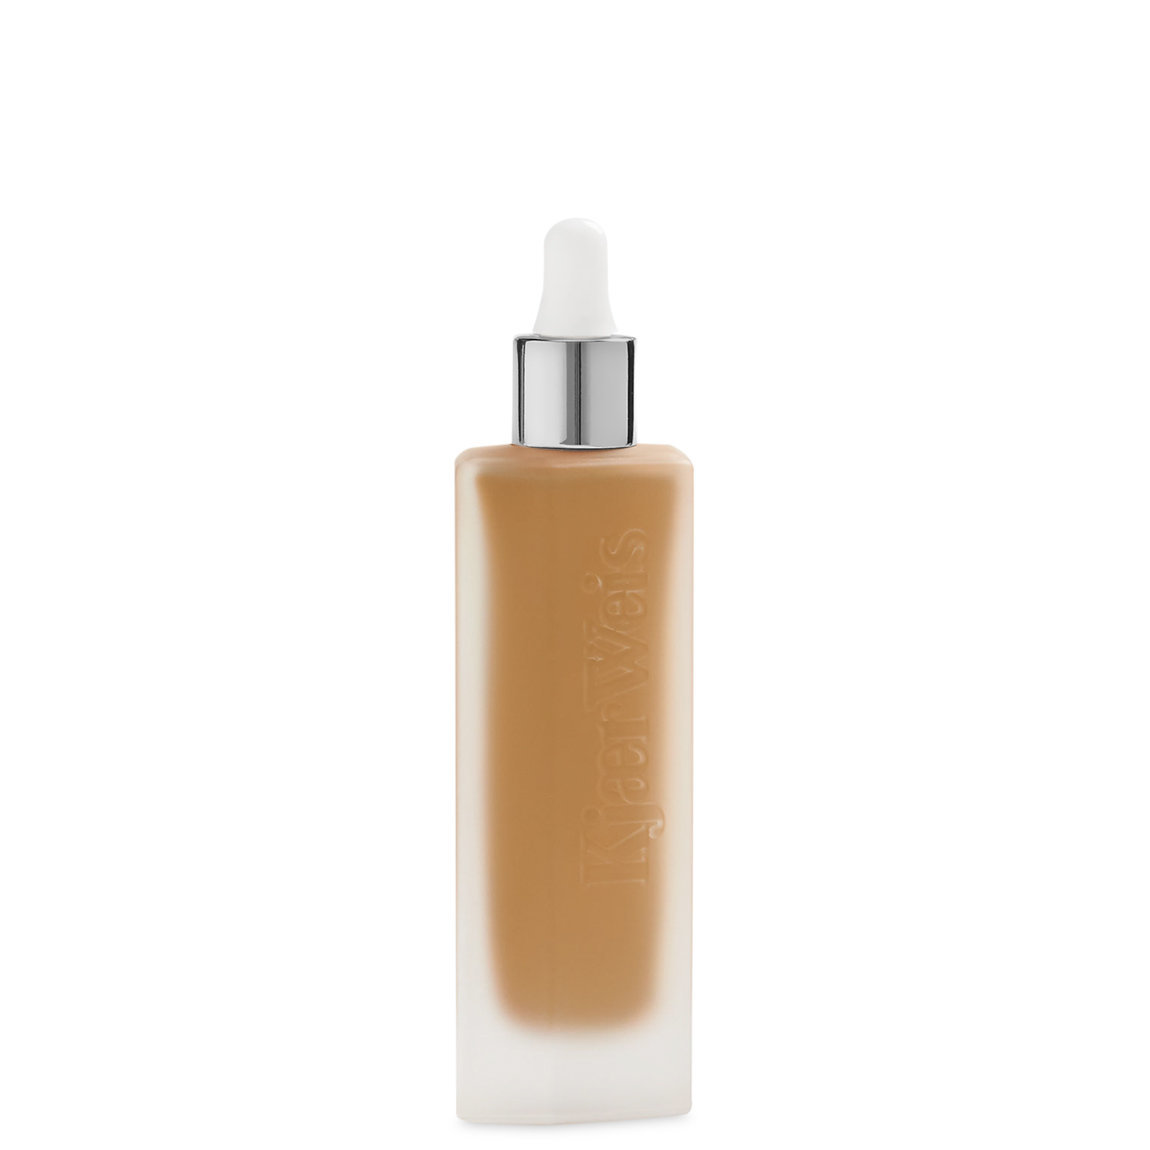 Kjaer Weis Invisible Touch Liquid Foundation D310 alternative view 1.